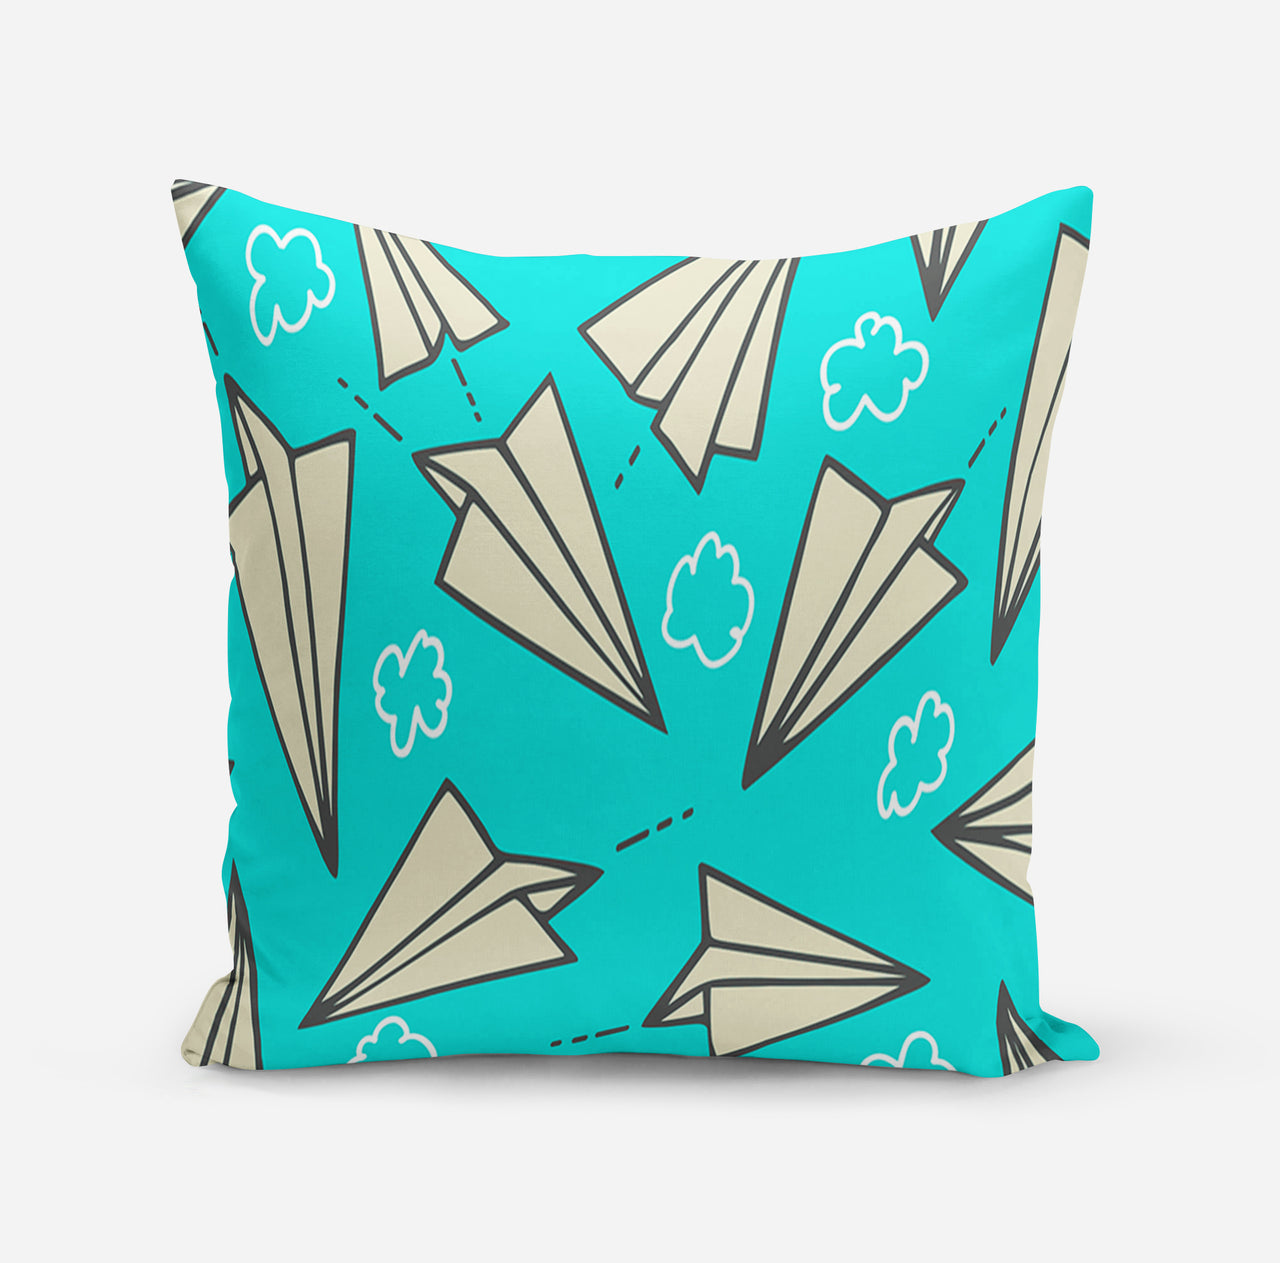 Super Cool Paper Airplanes Designed Pillows